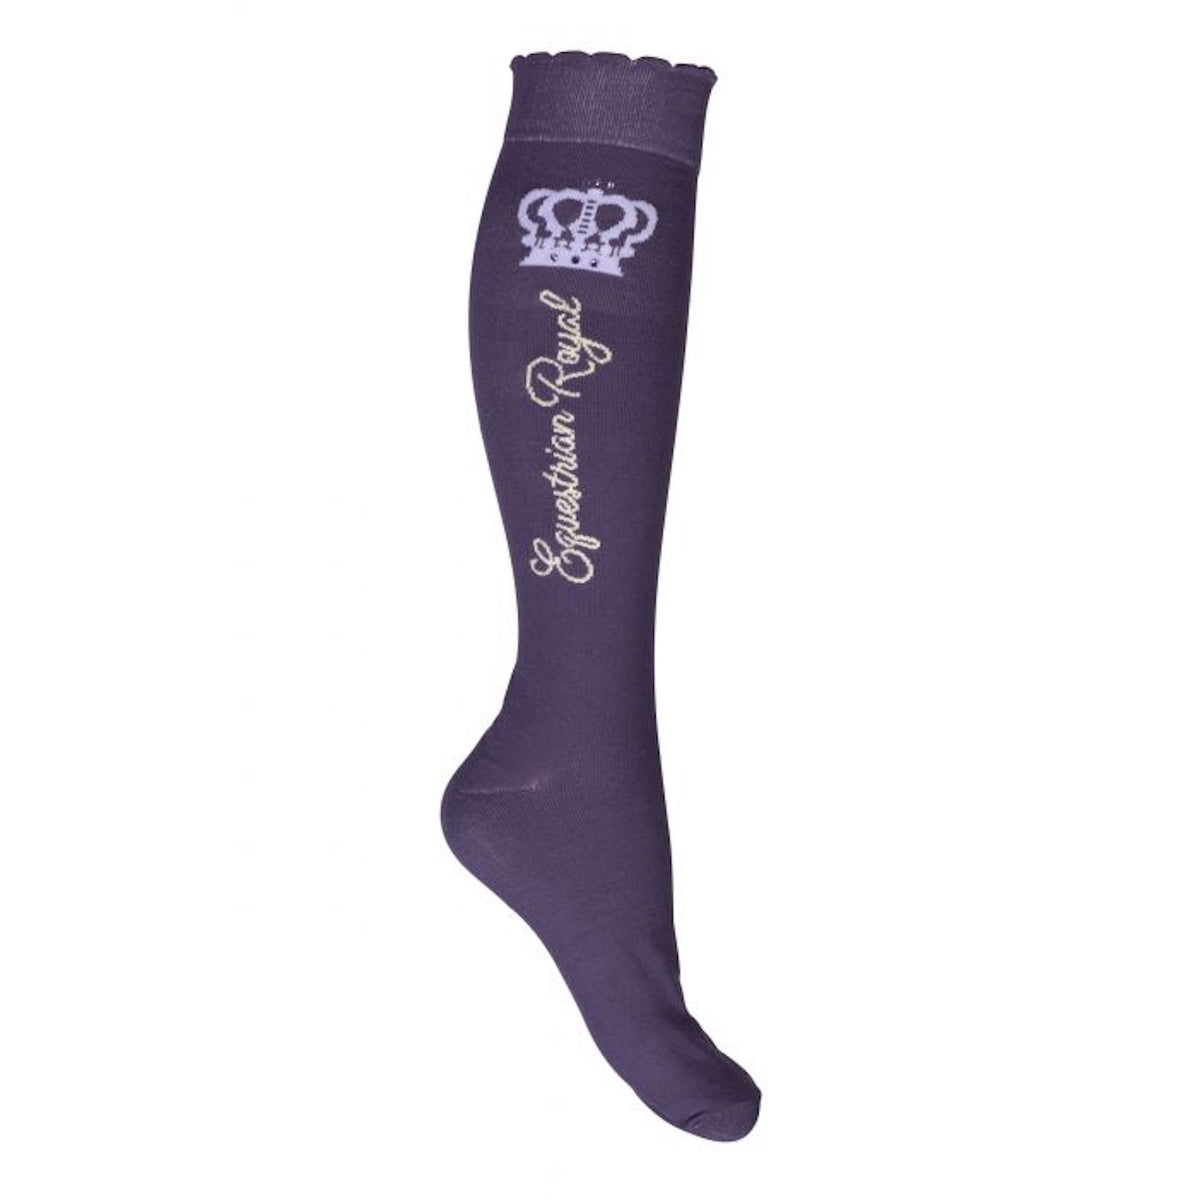 Lavender Bay socks in the colour dark lilac detailing the words &quot;equestrian royal&quot; down the side aswell as a crown and diamantes at the top of the socks.